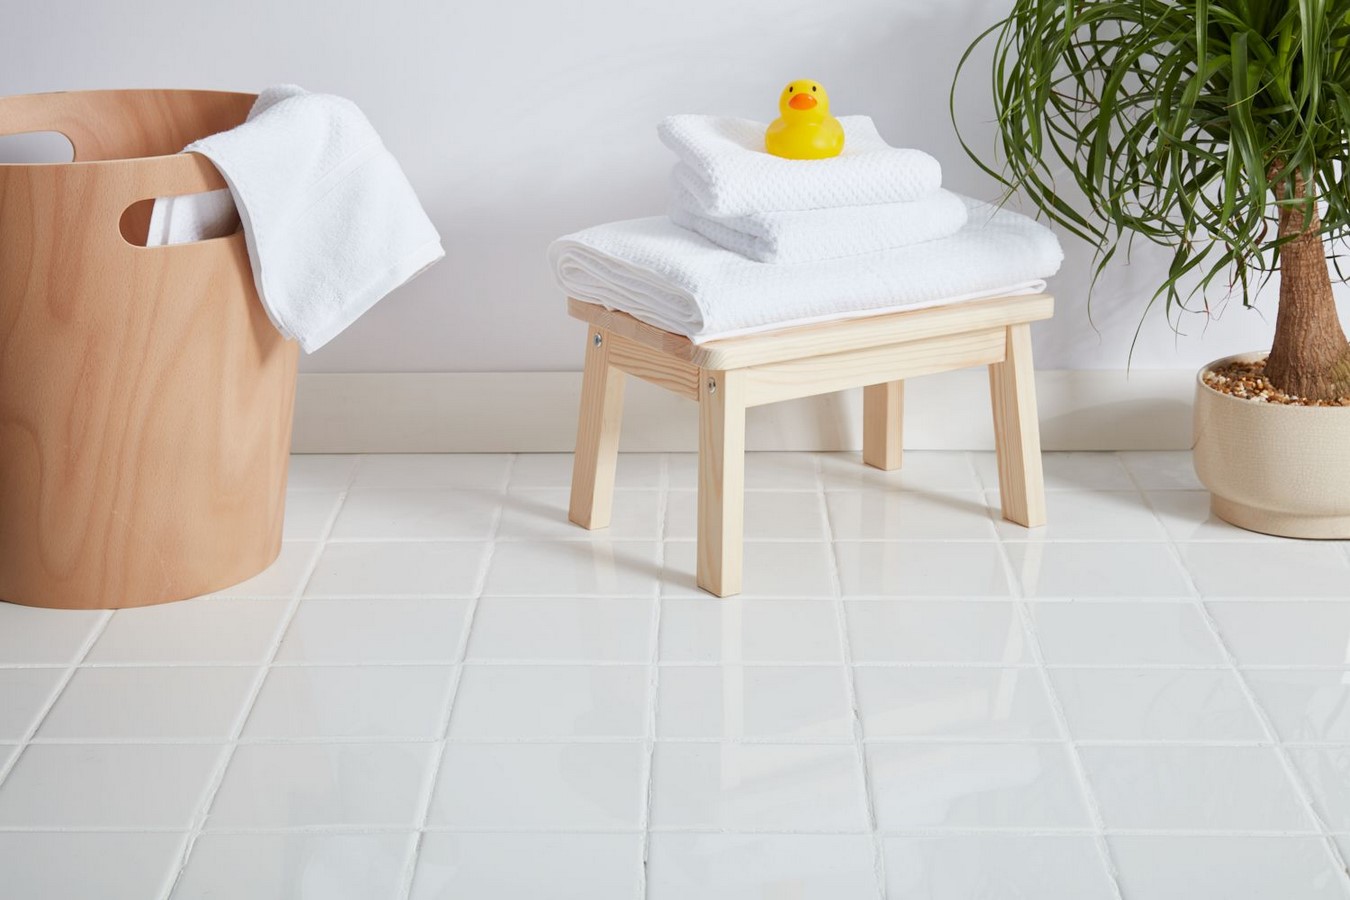 Floor Tiles: Where to use them - Sheet7